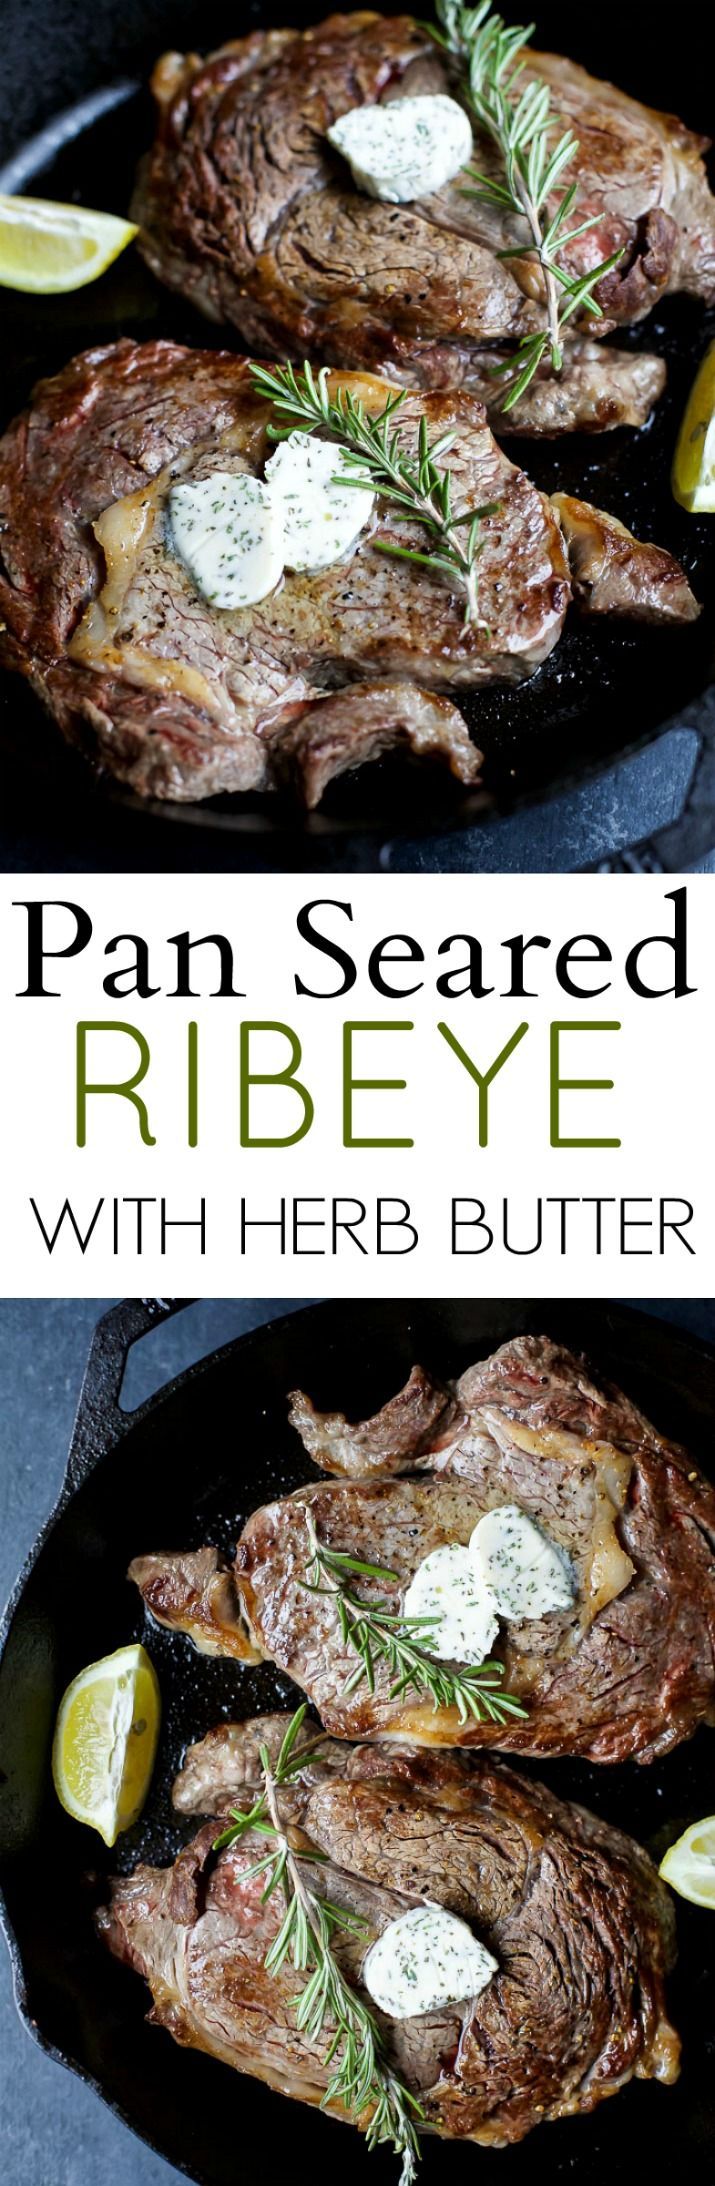 The perfect steak in just 15 minutes! Pan Seared Ribeye that’s finished off in the oven and topped with homemade Herb Butter that